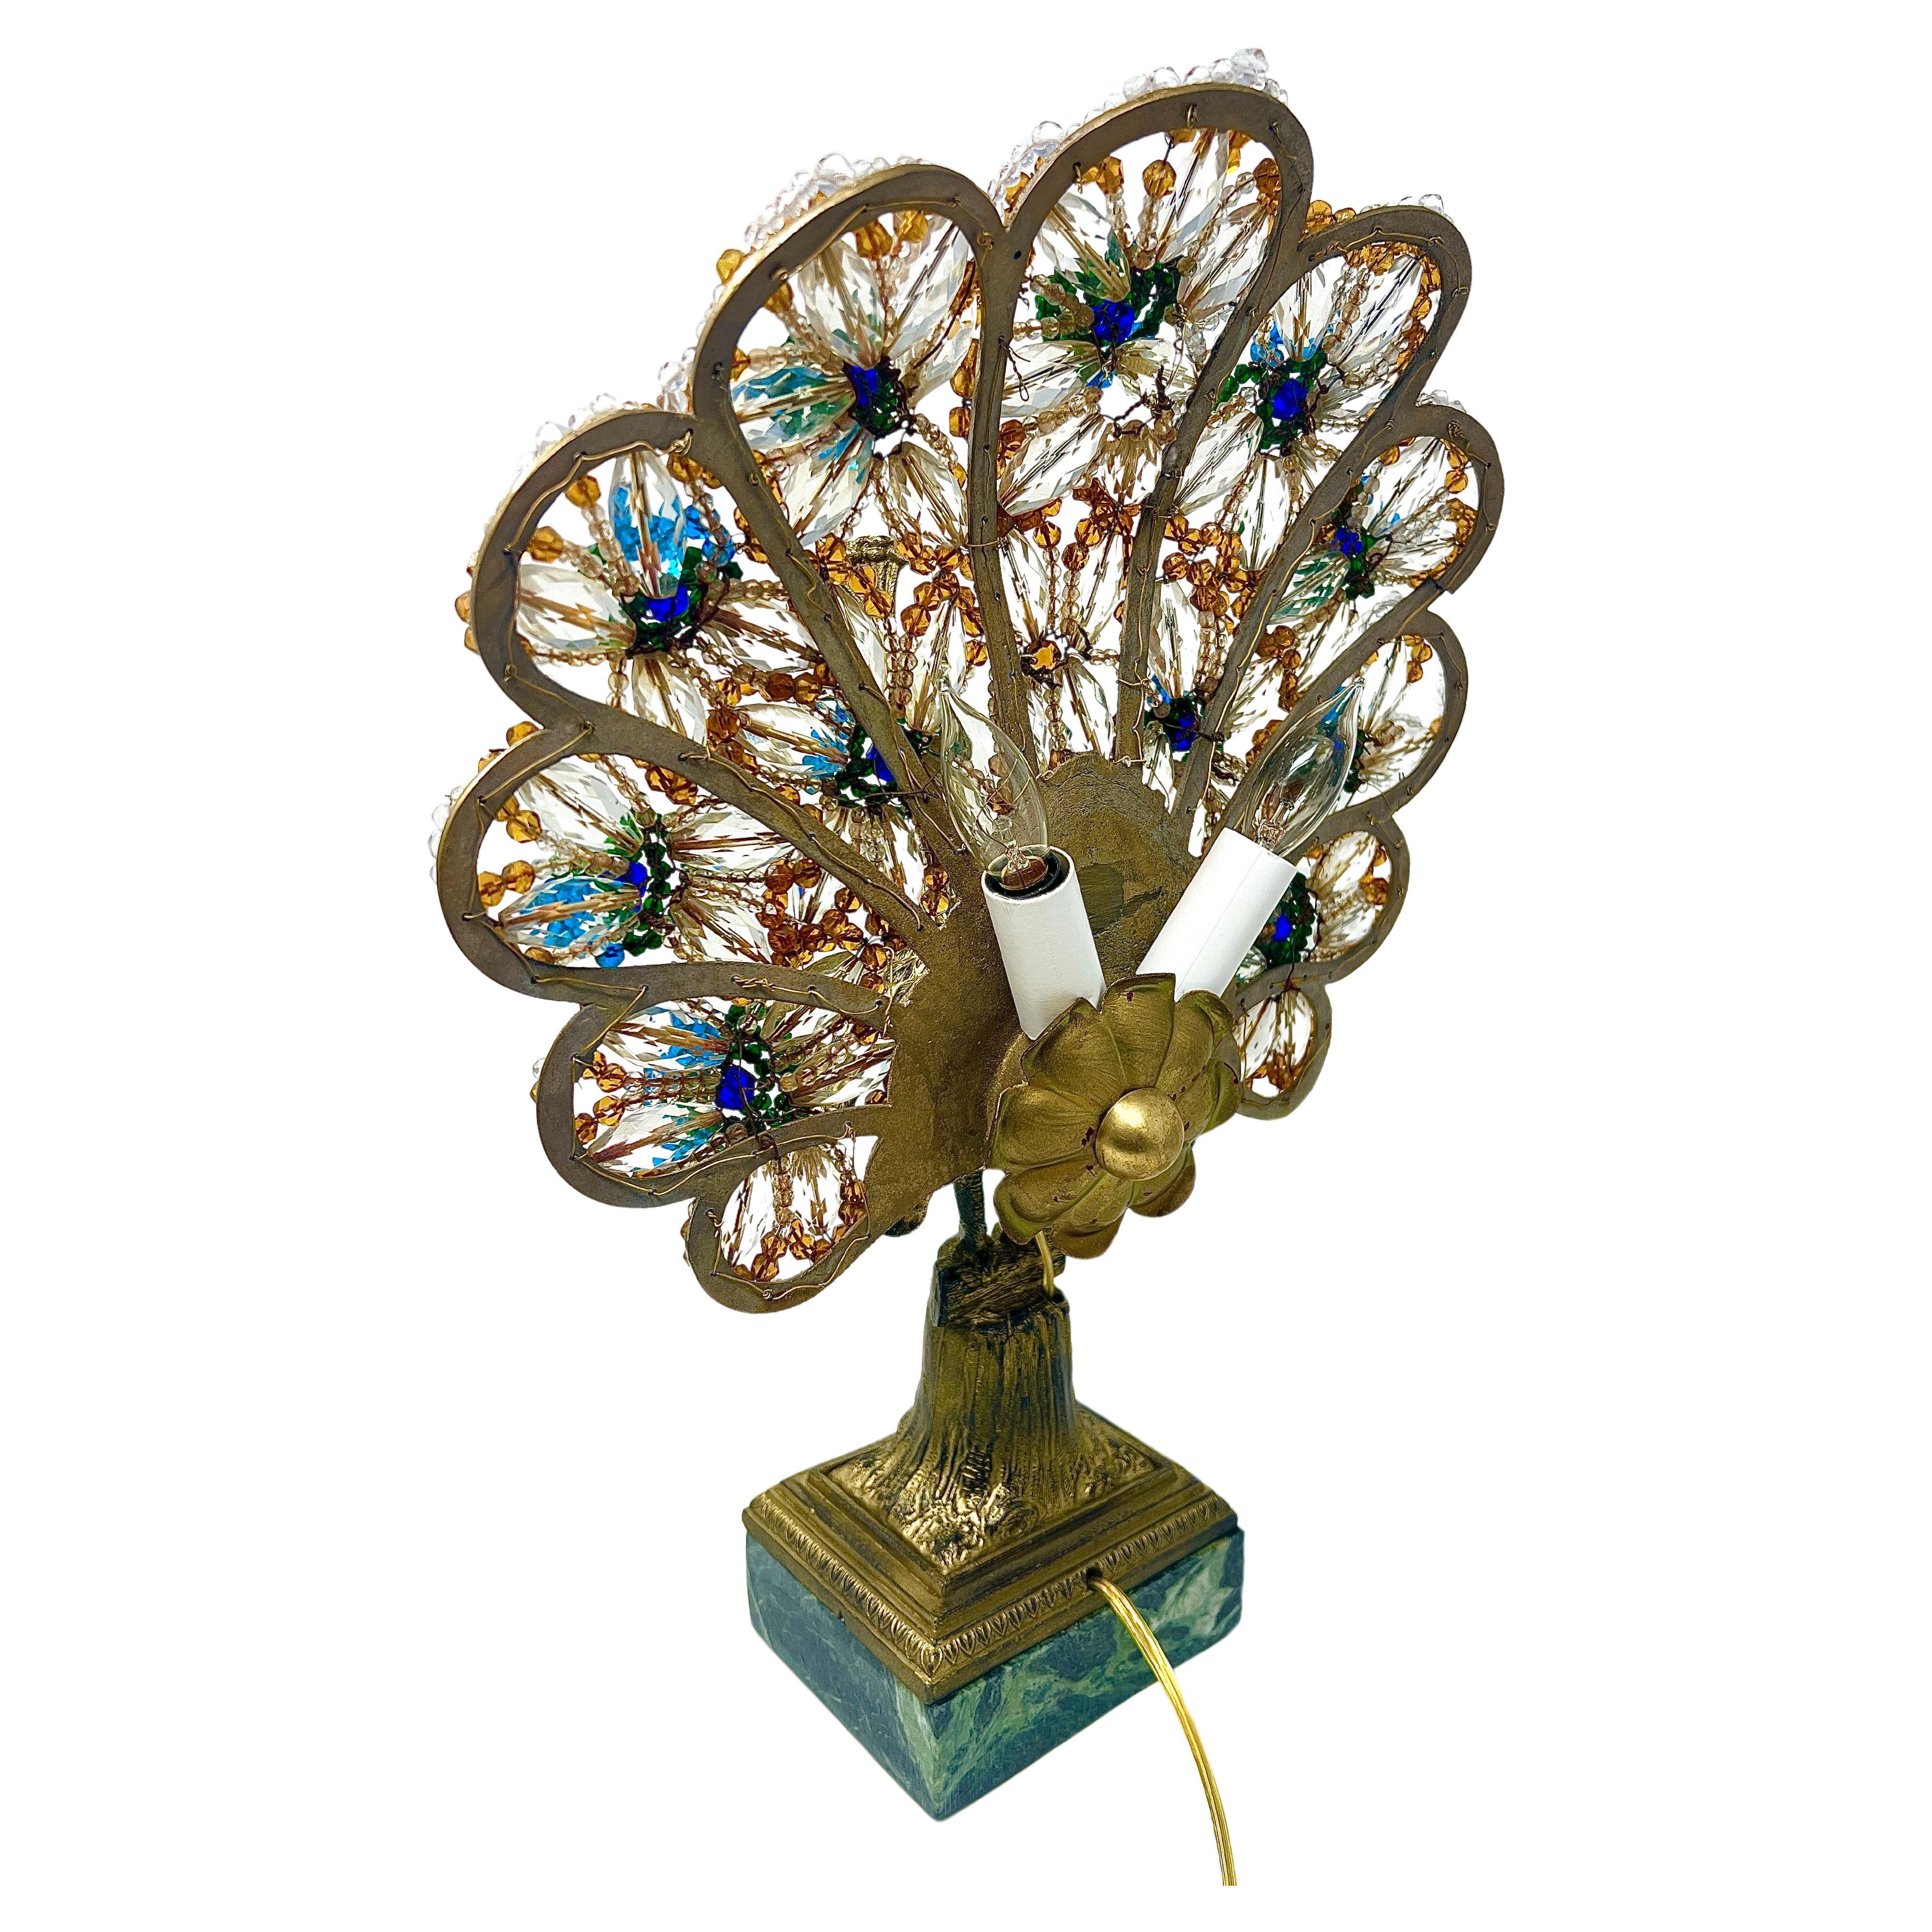 Antique French Art Nouveau Gold Bronze & Crystal Beaded Peacock Lamp, Circa 1915 For Sale 1